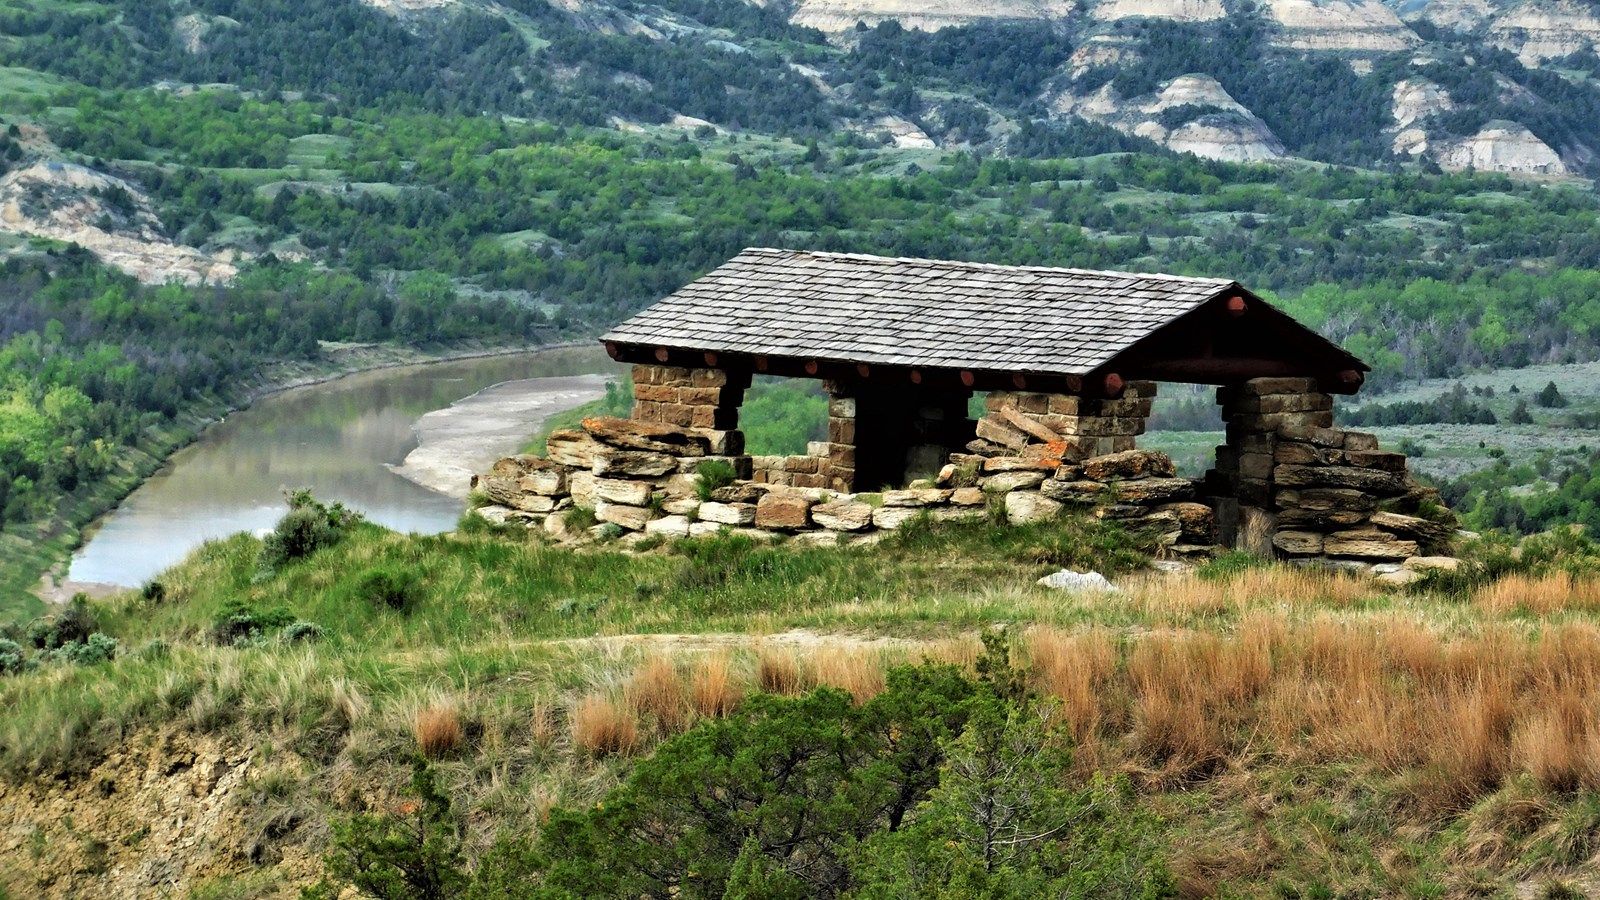 A small stone shelter with a low pitched roof stands at the edge of a butte overlooking a river.